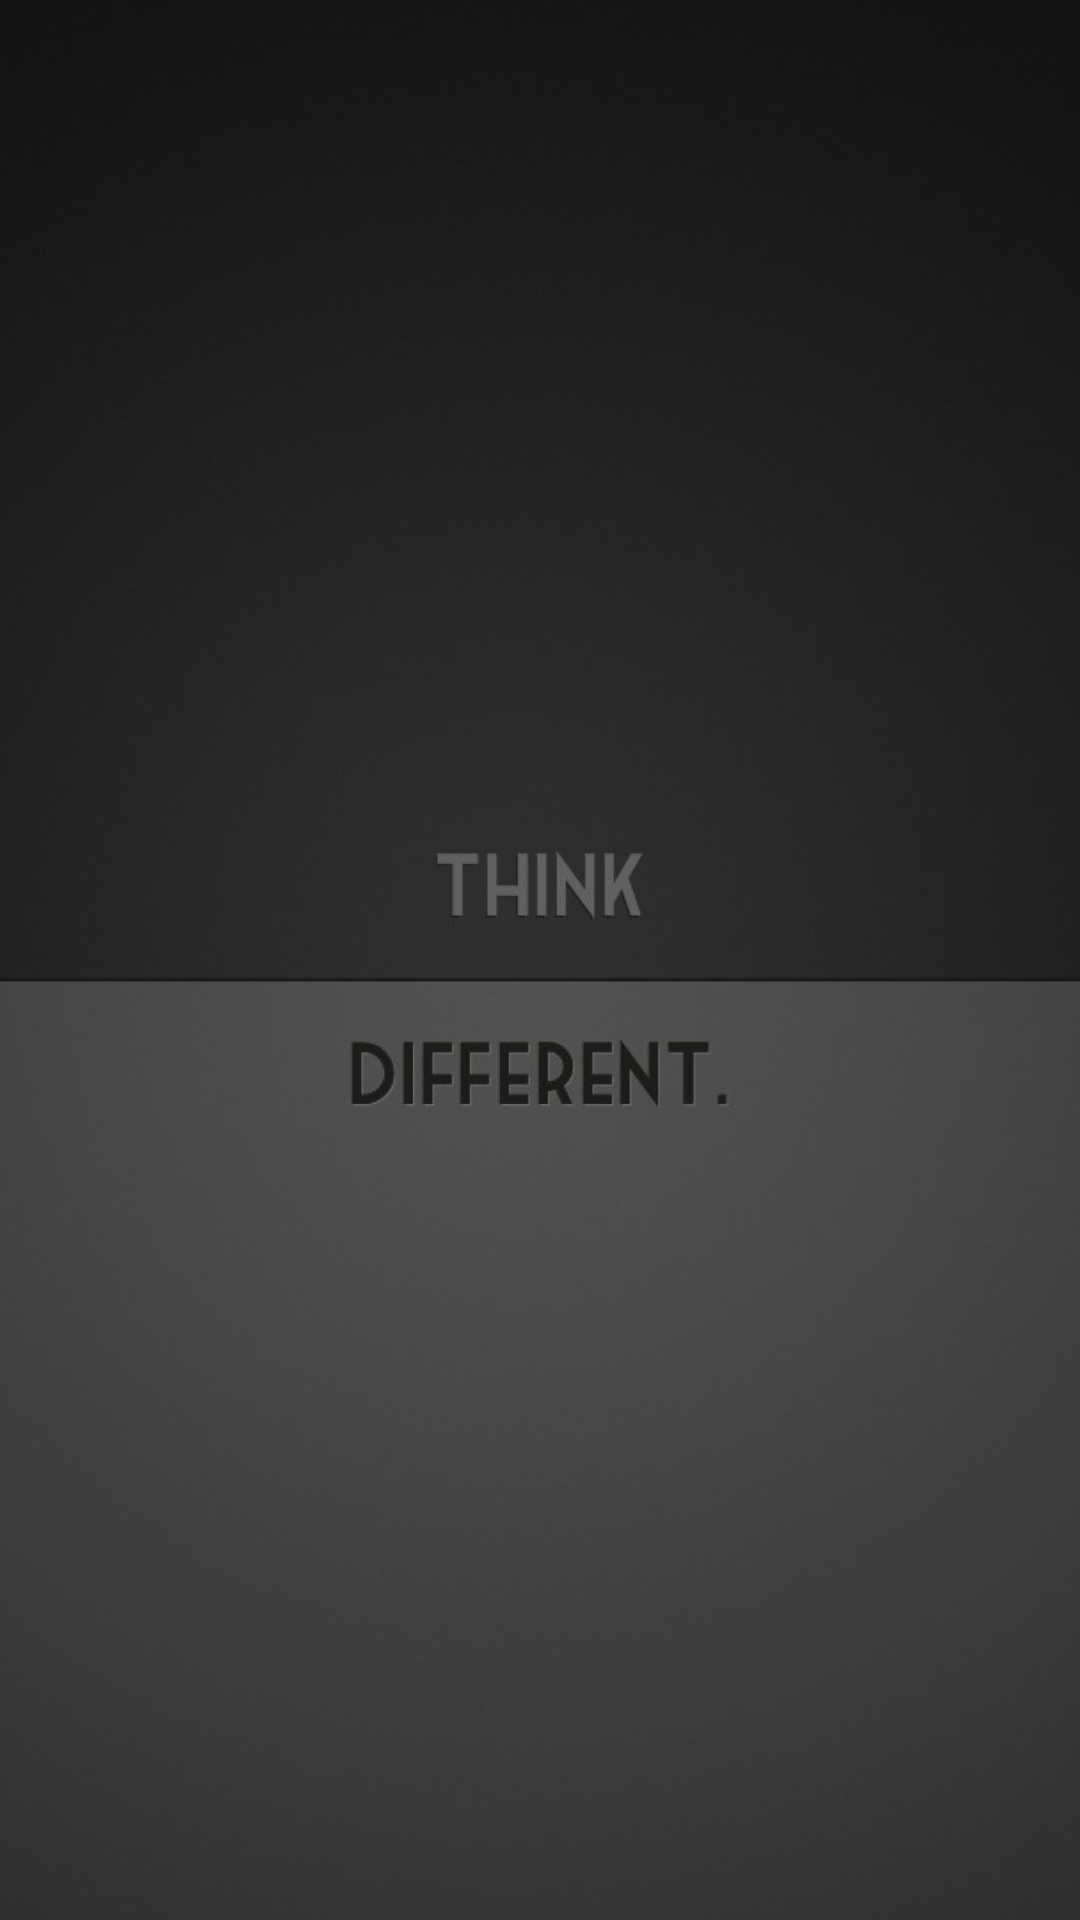 Think Different wallpaper 1080x1920